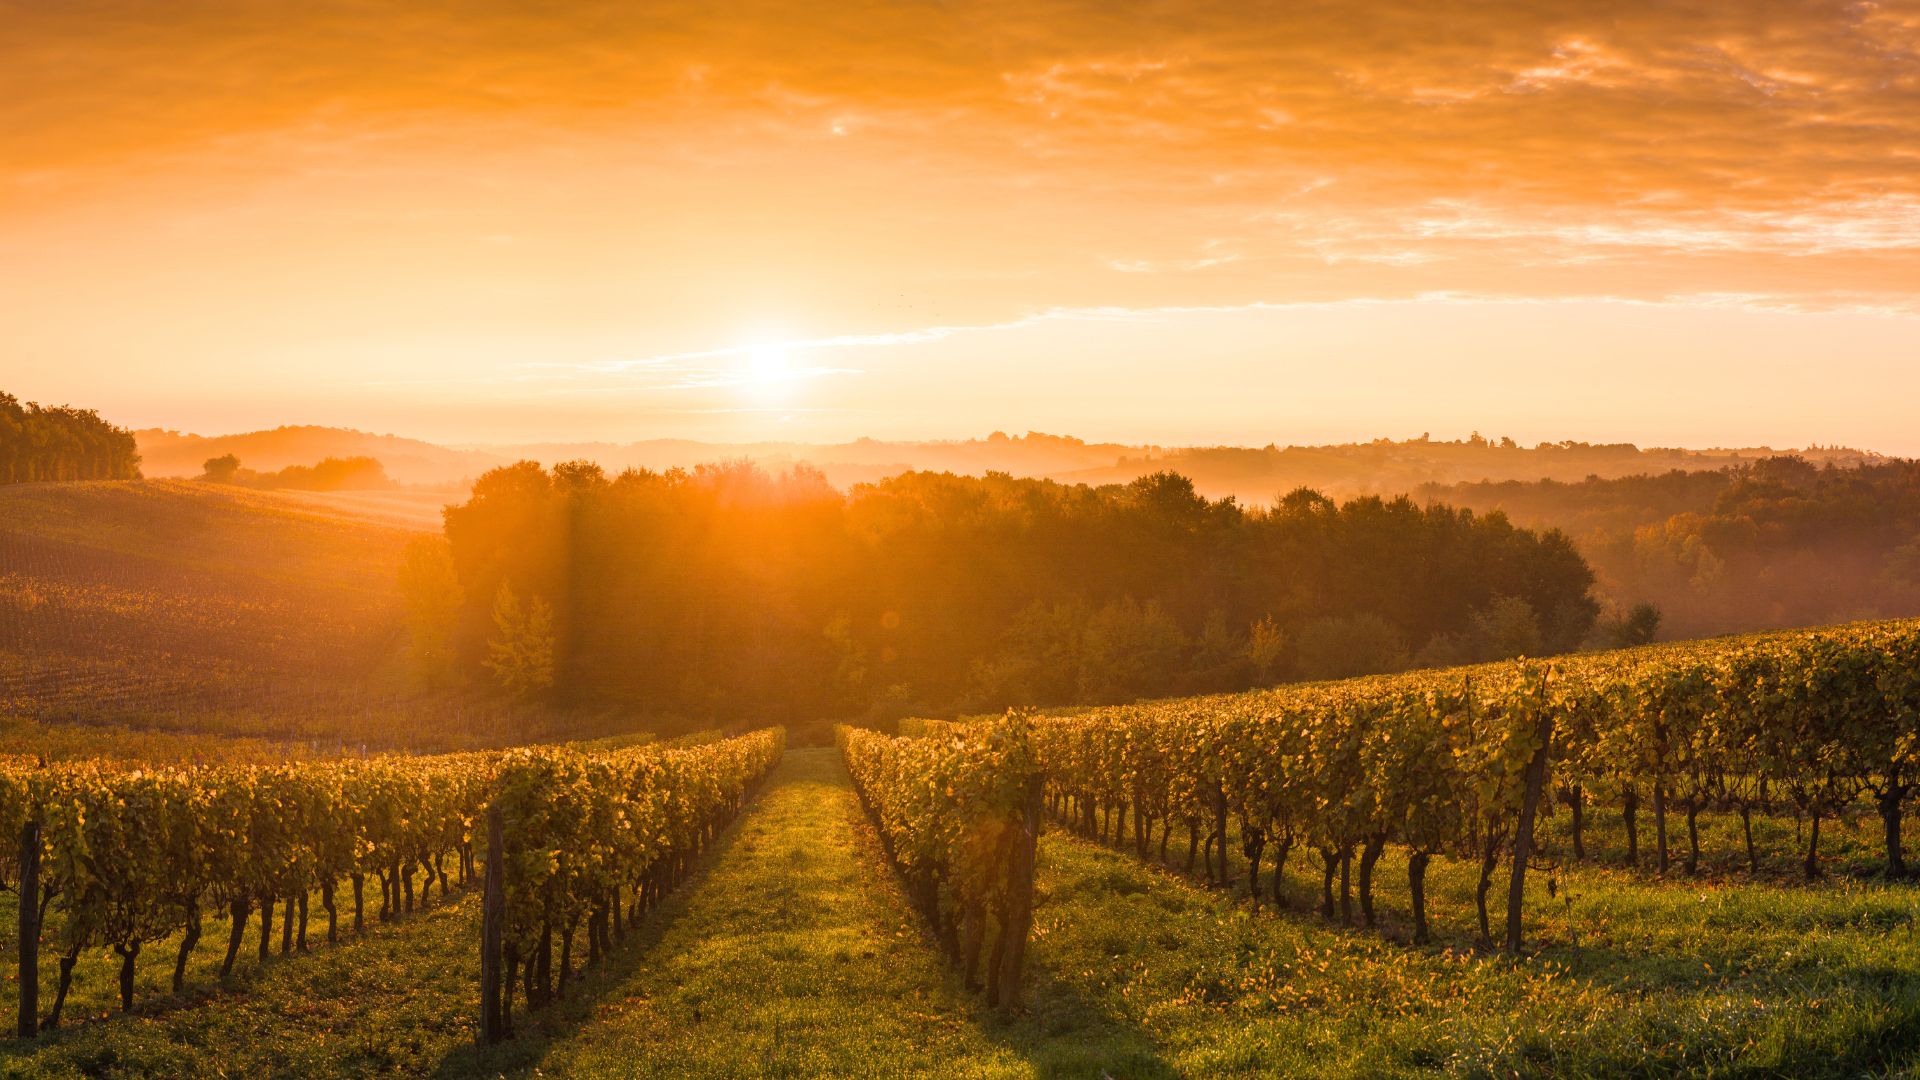 gorgeous hazy golden sunset over forests and fields with rows of grapes growing in a vineyard